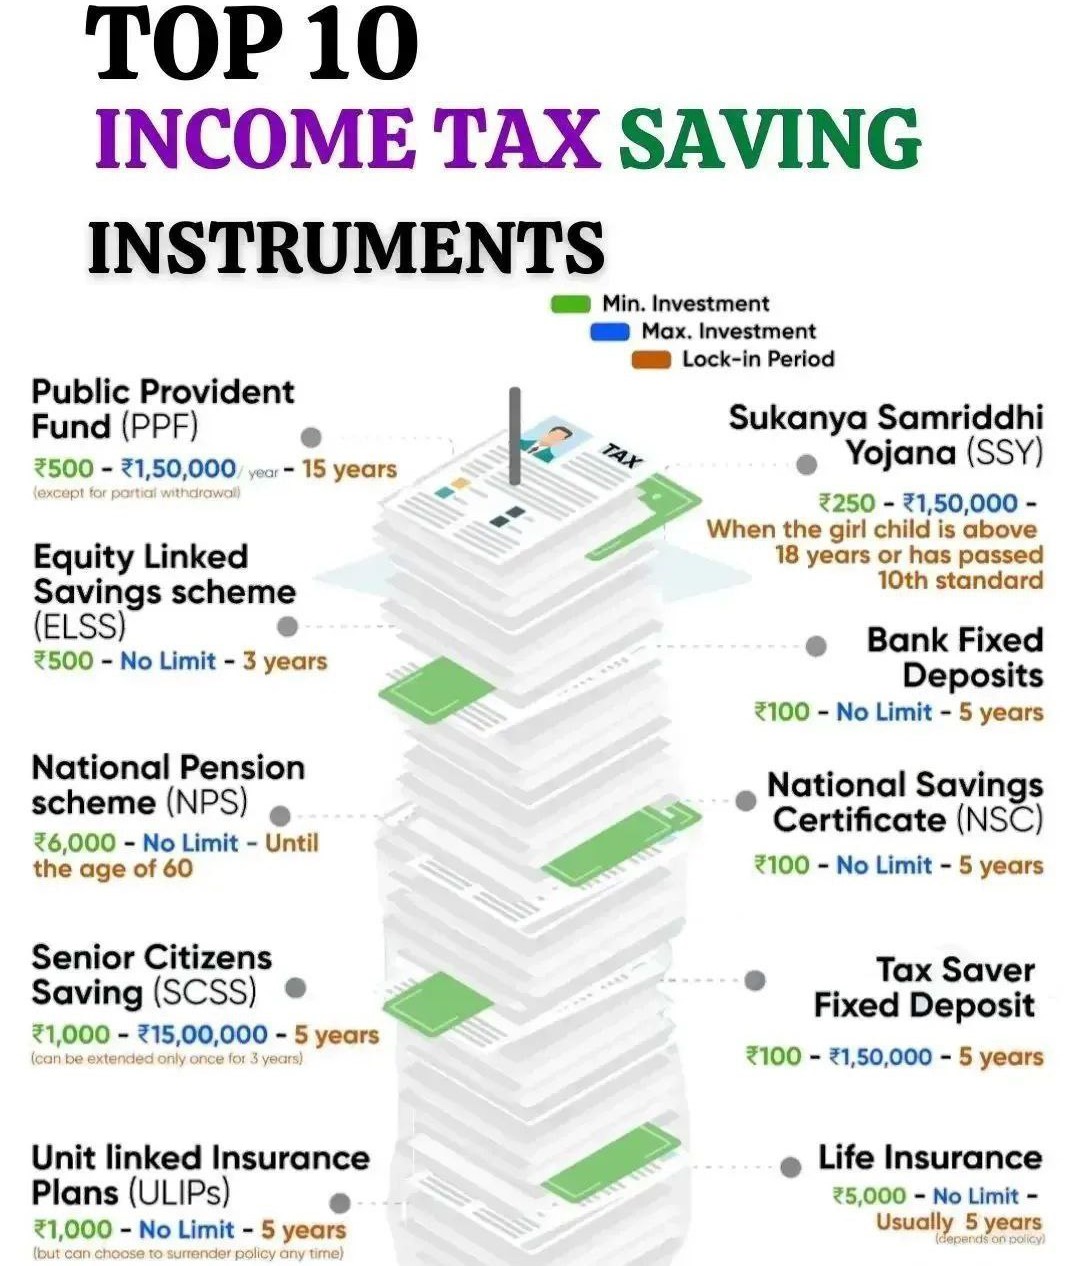 Top 10 Income Tax Saving Instruments